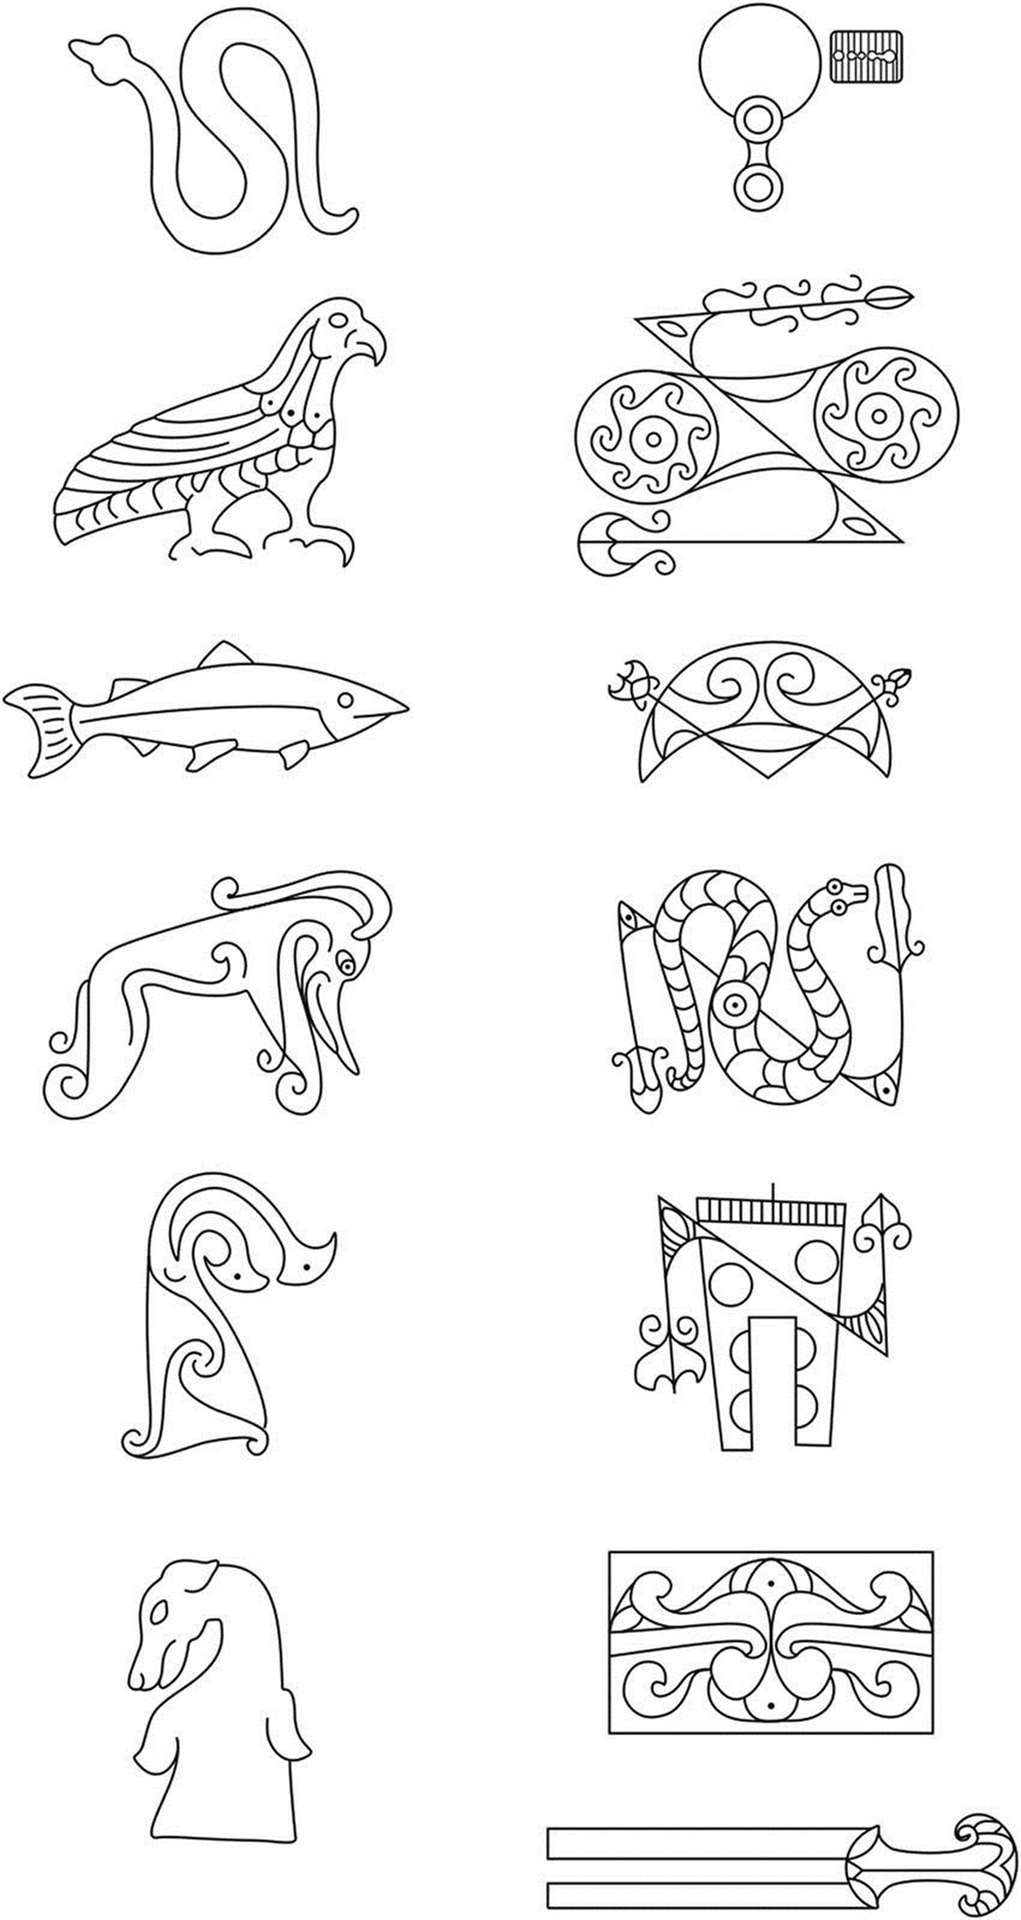 Examples of Pictish art found at locations across north and eastern Scotland. Picture: Creative commons